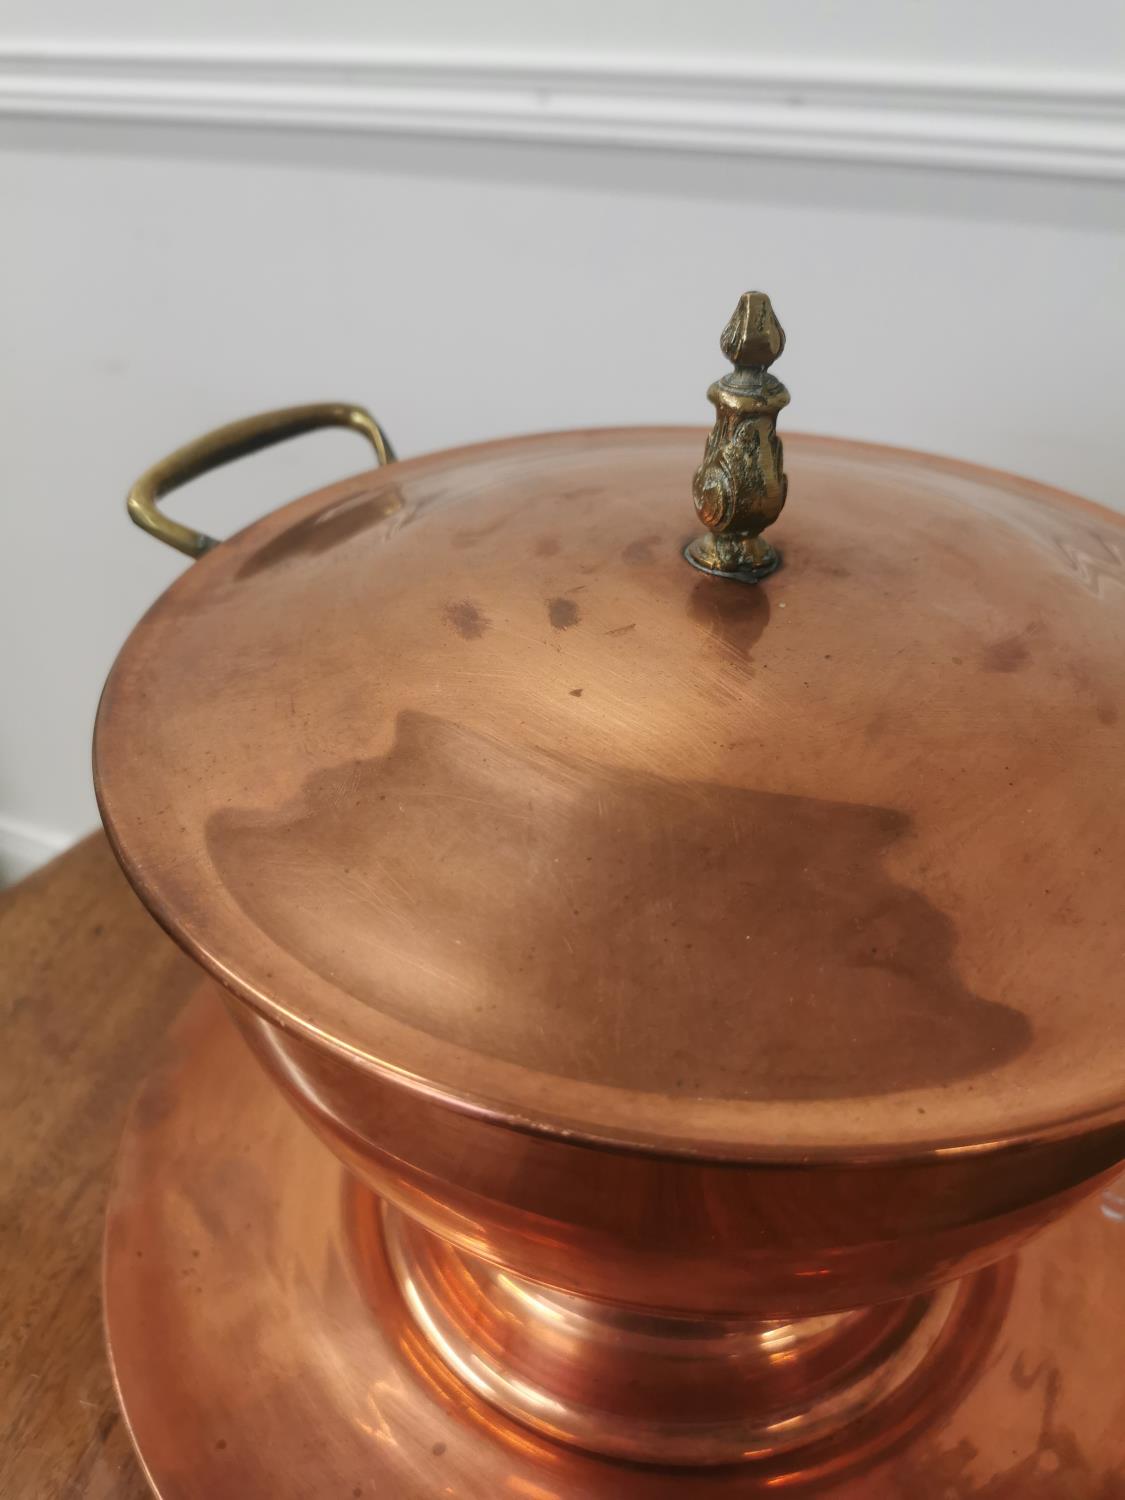 Early 20th. C. brass and copper lidded tureen with ladle. { cm H X D57cm W } - Image 2 of 3